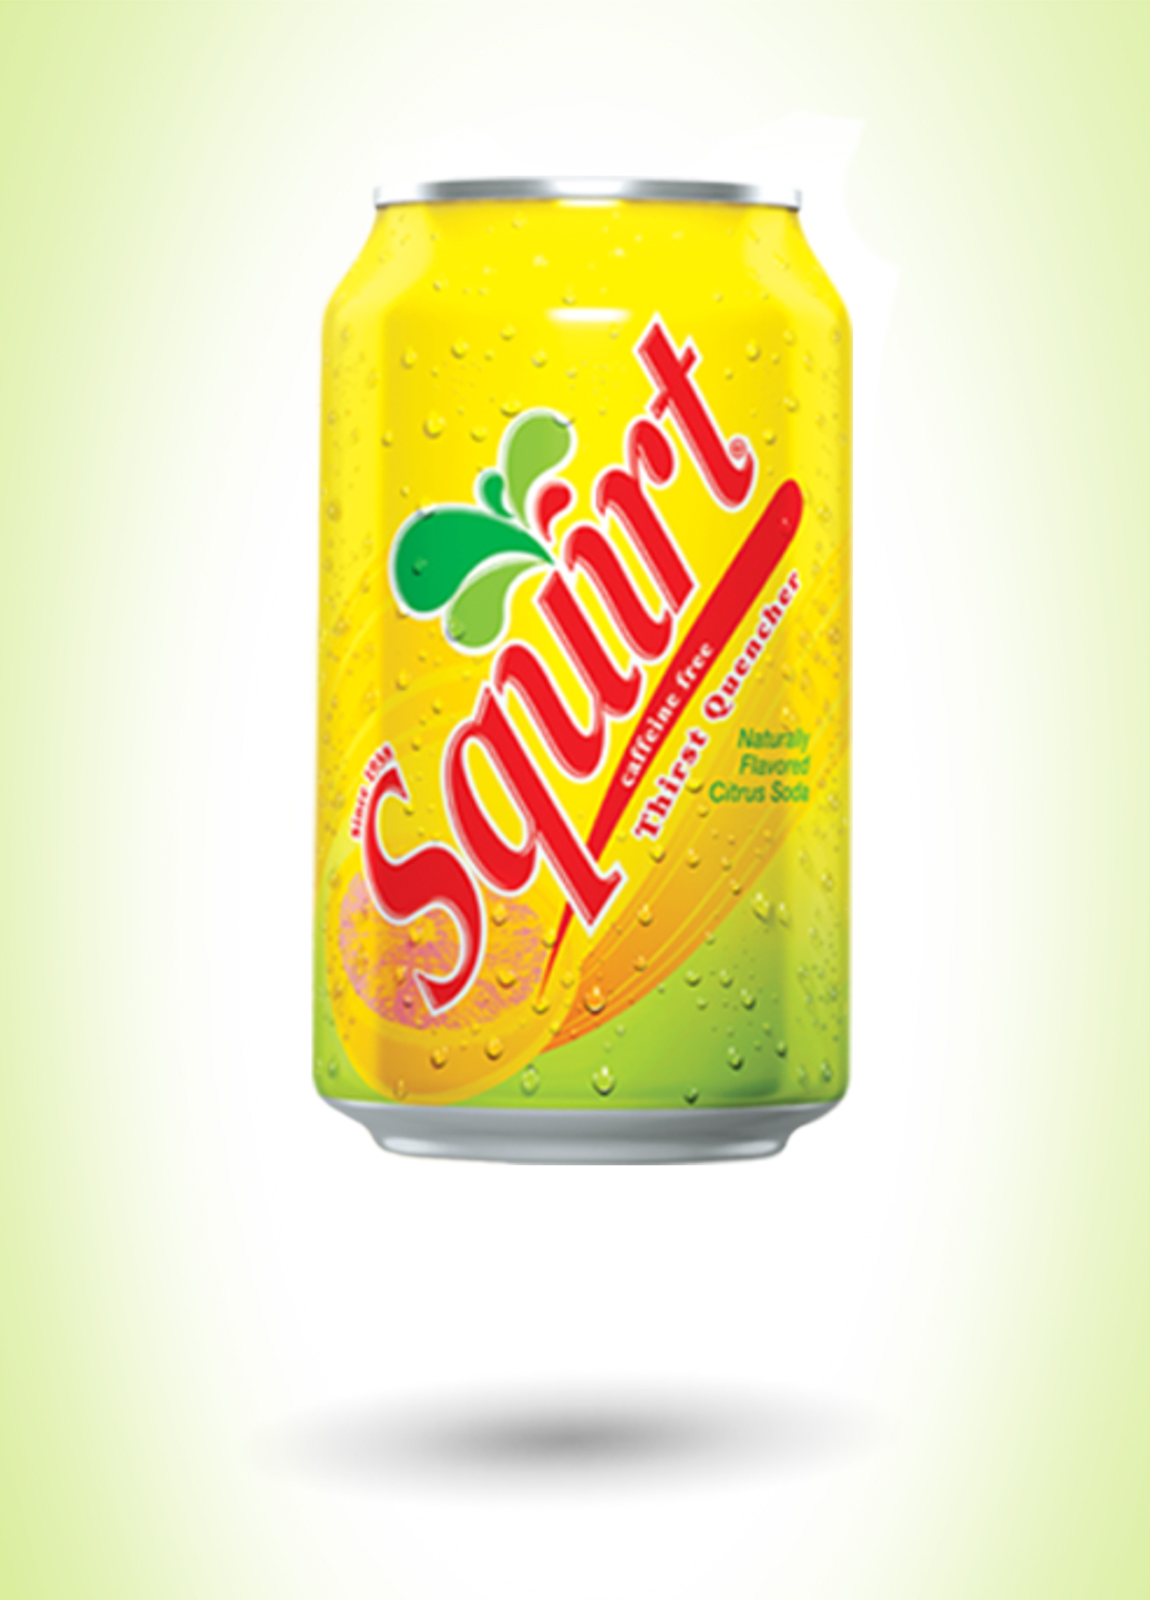 Squirt 9